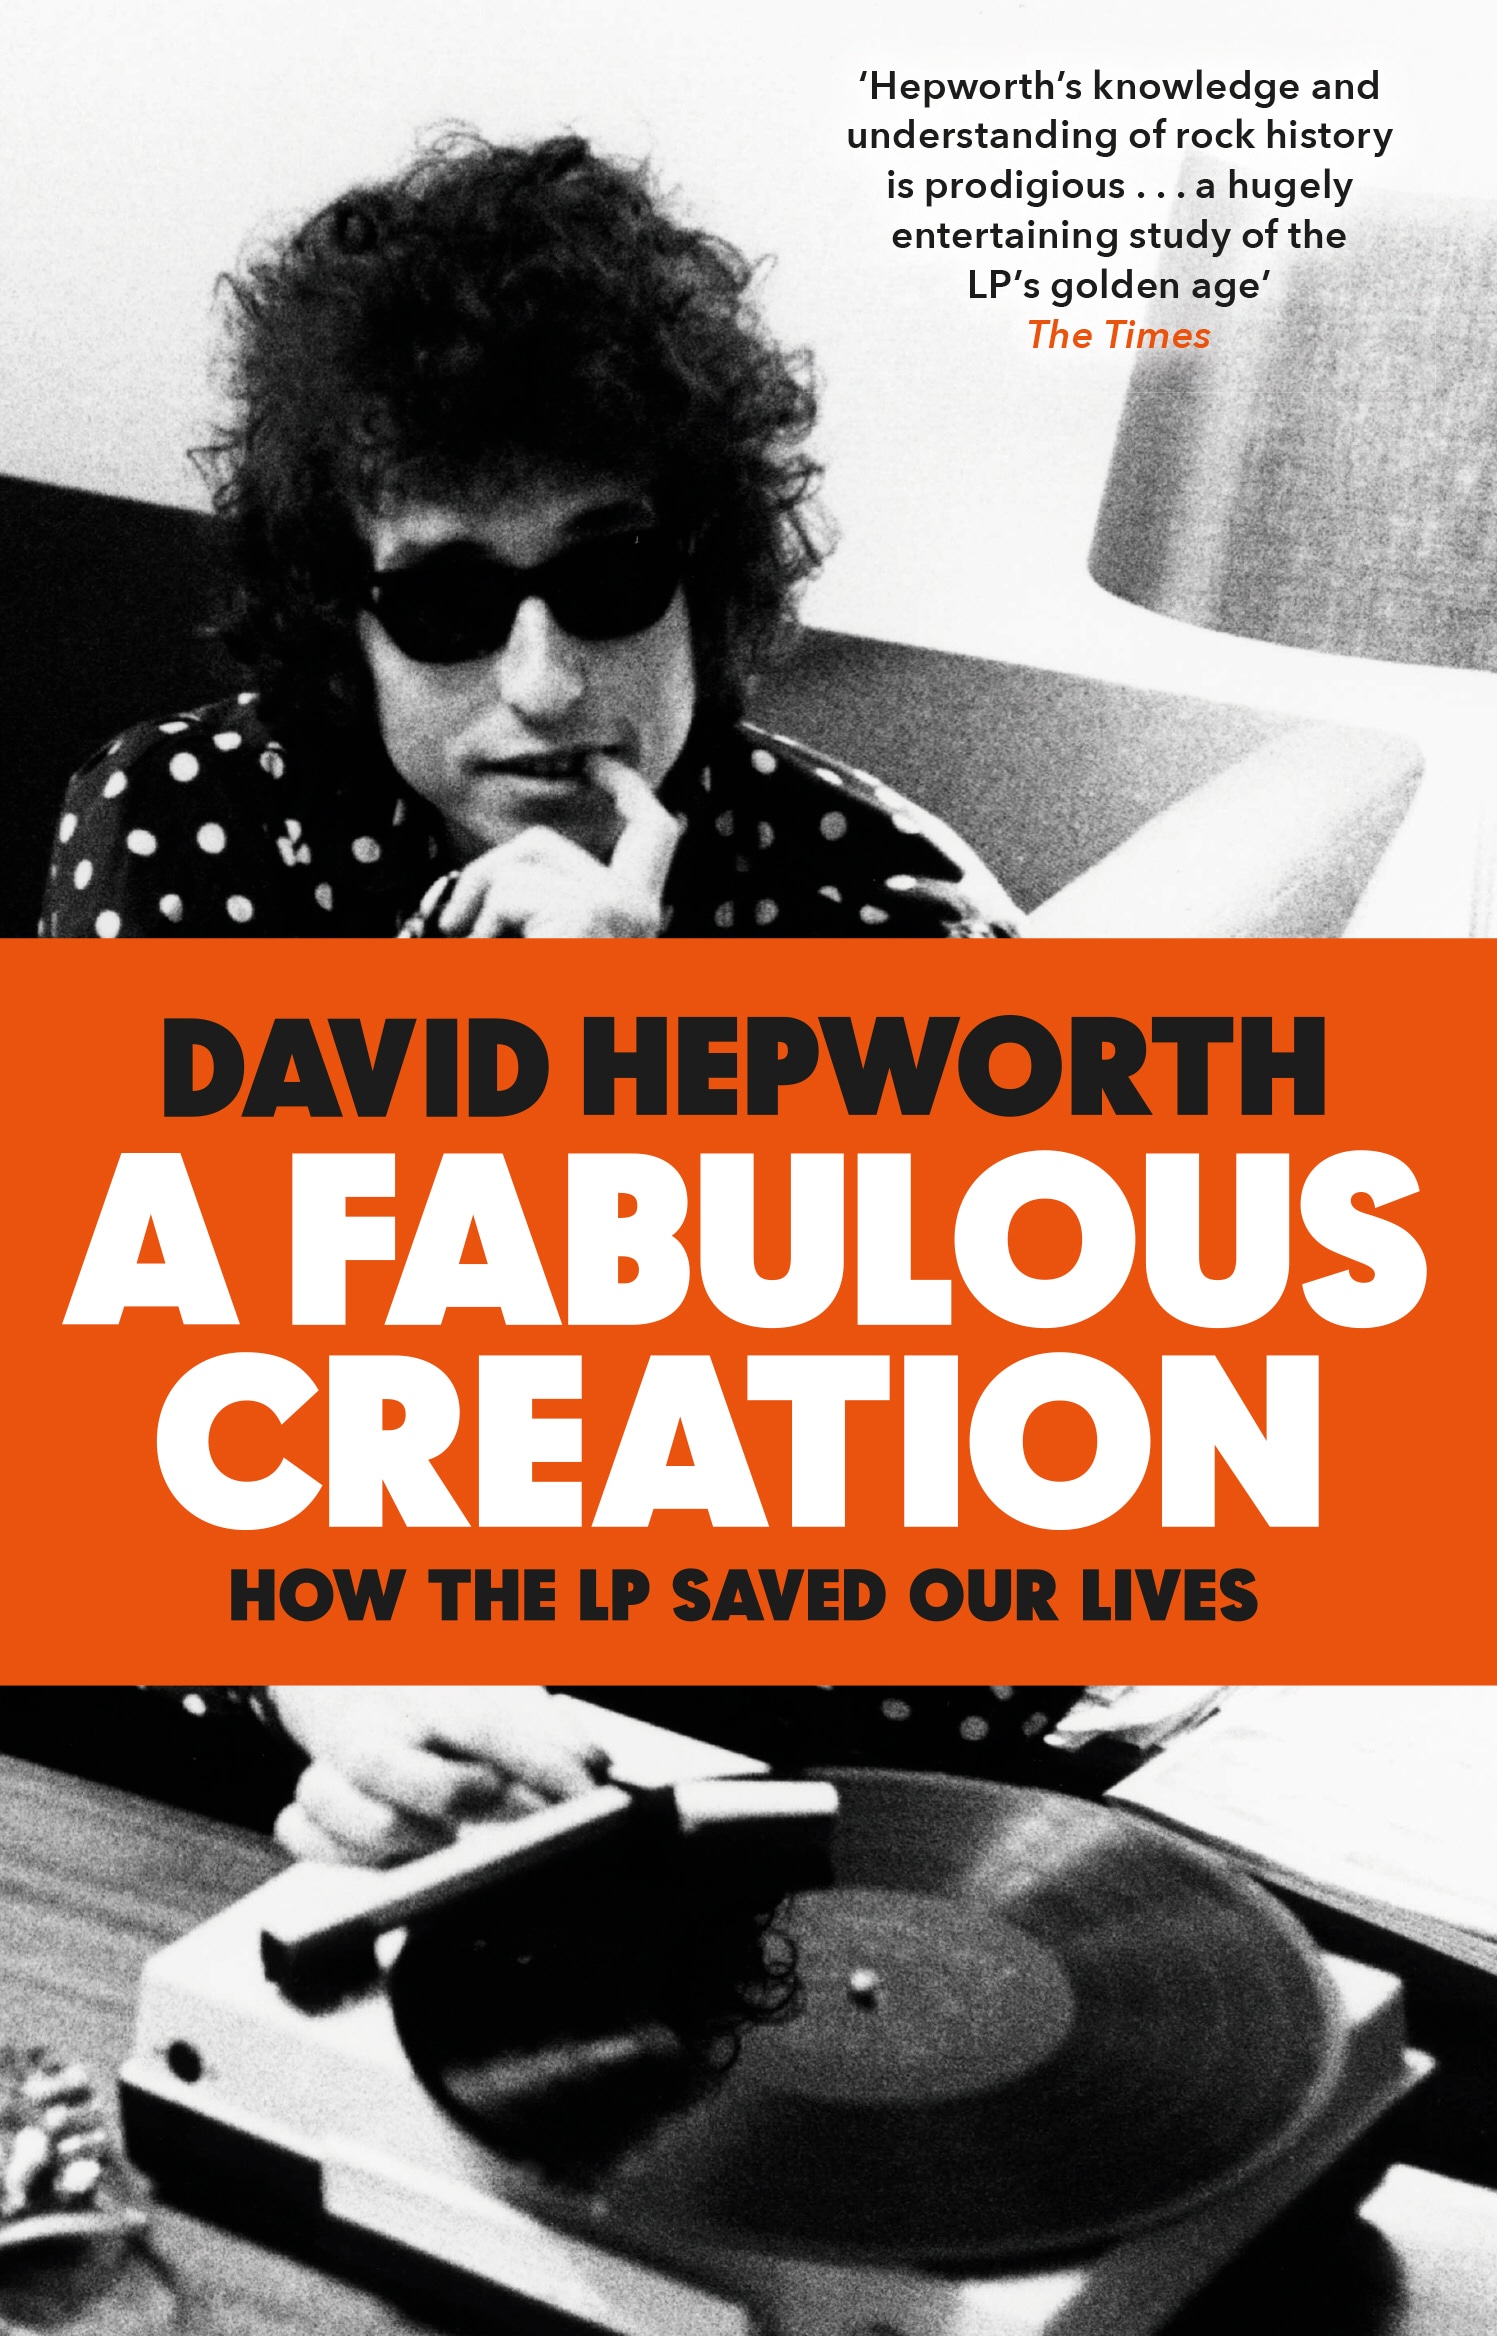 Book “A Fabulous Creation” by David Hepworth — April 2, 2020